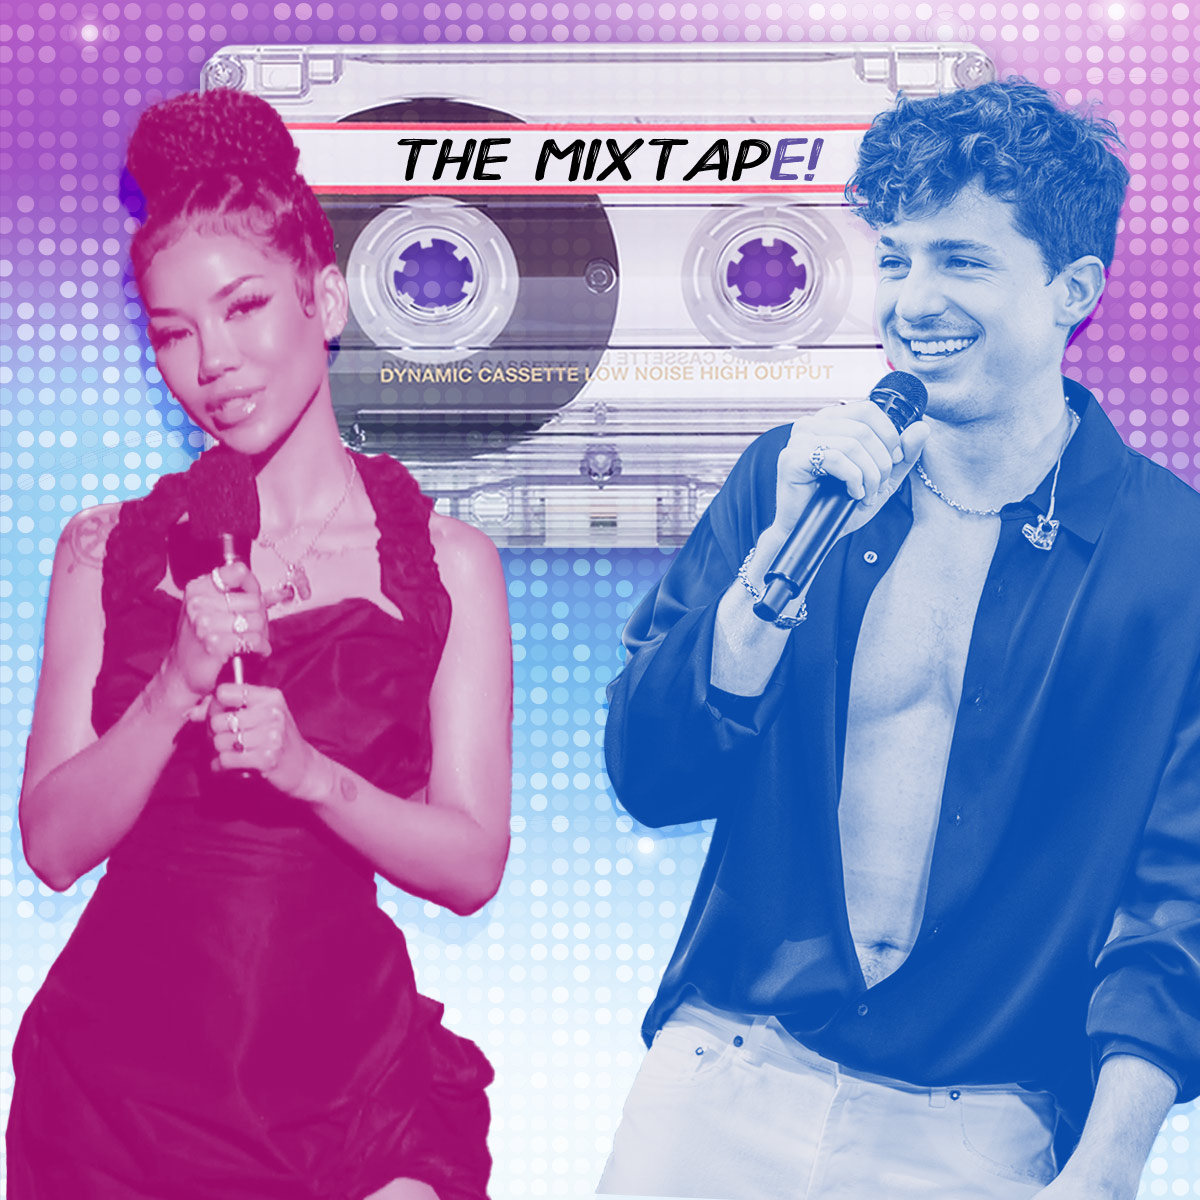 https://akns-images.eonline.com/eol_images/Entire_Site/2023231/rs_1200x1200-230331142903-1200-the-mixtape-jhene-charlie.jpg?fit=around%7C660:372&output-quality=90&crop=660:372;center,top